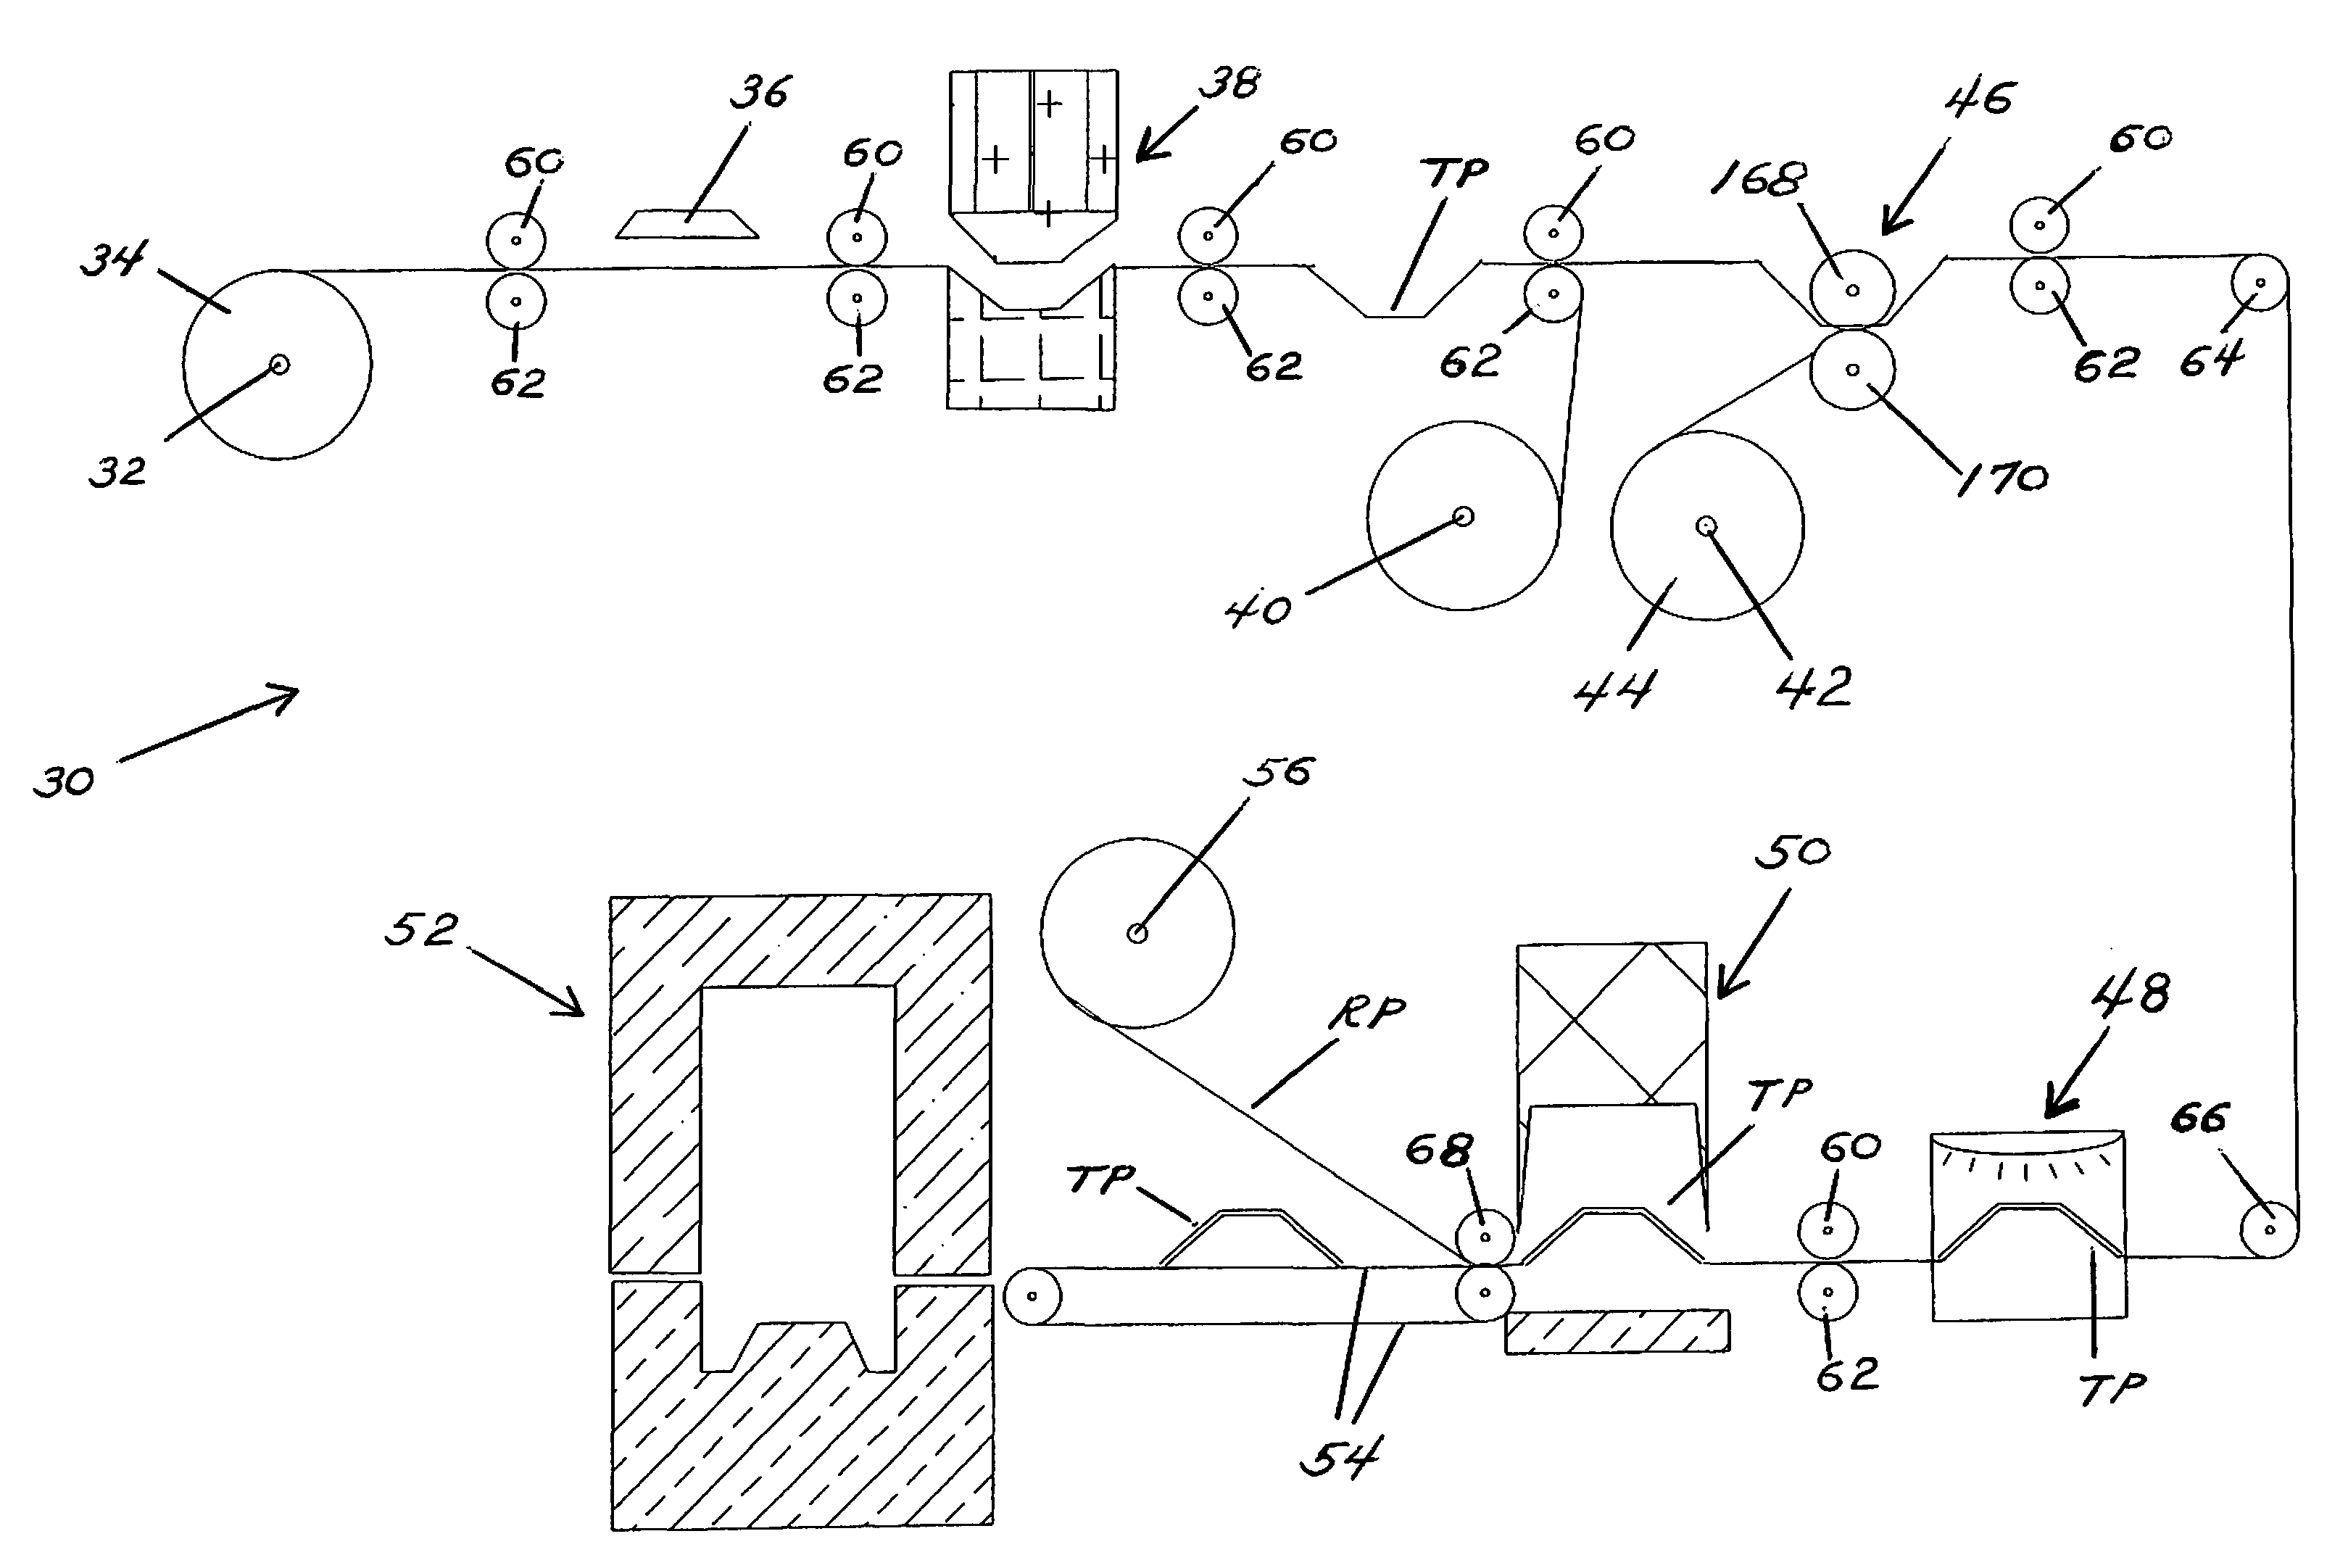 Method for molding an object containing a radio frequency identification tag